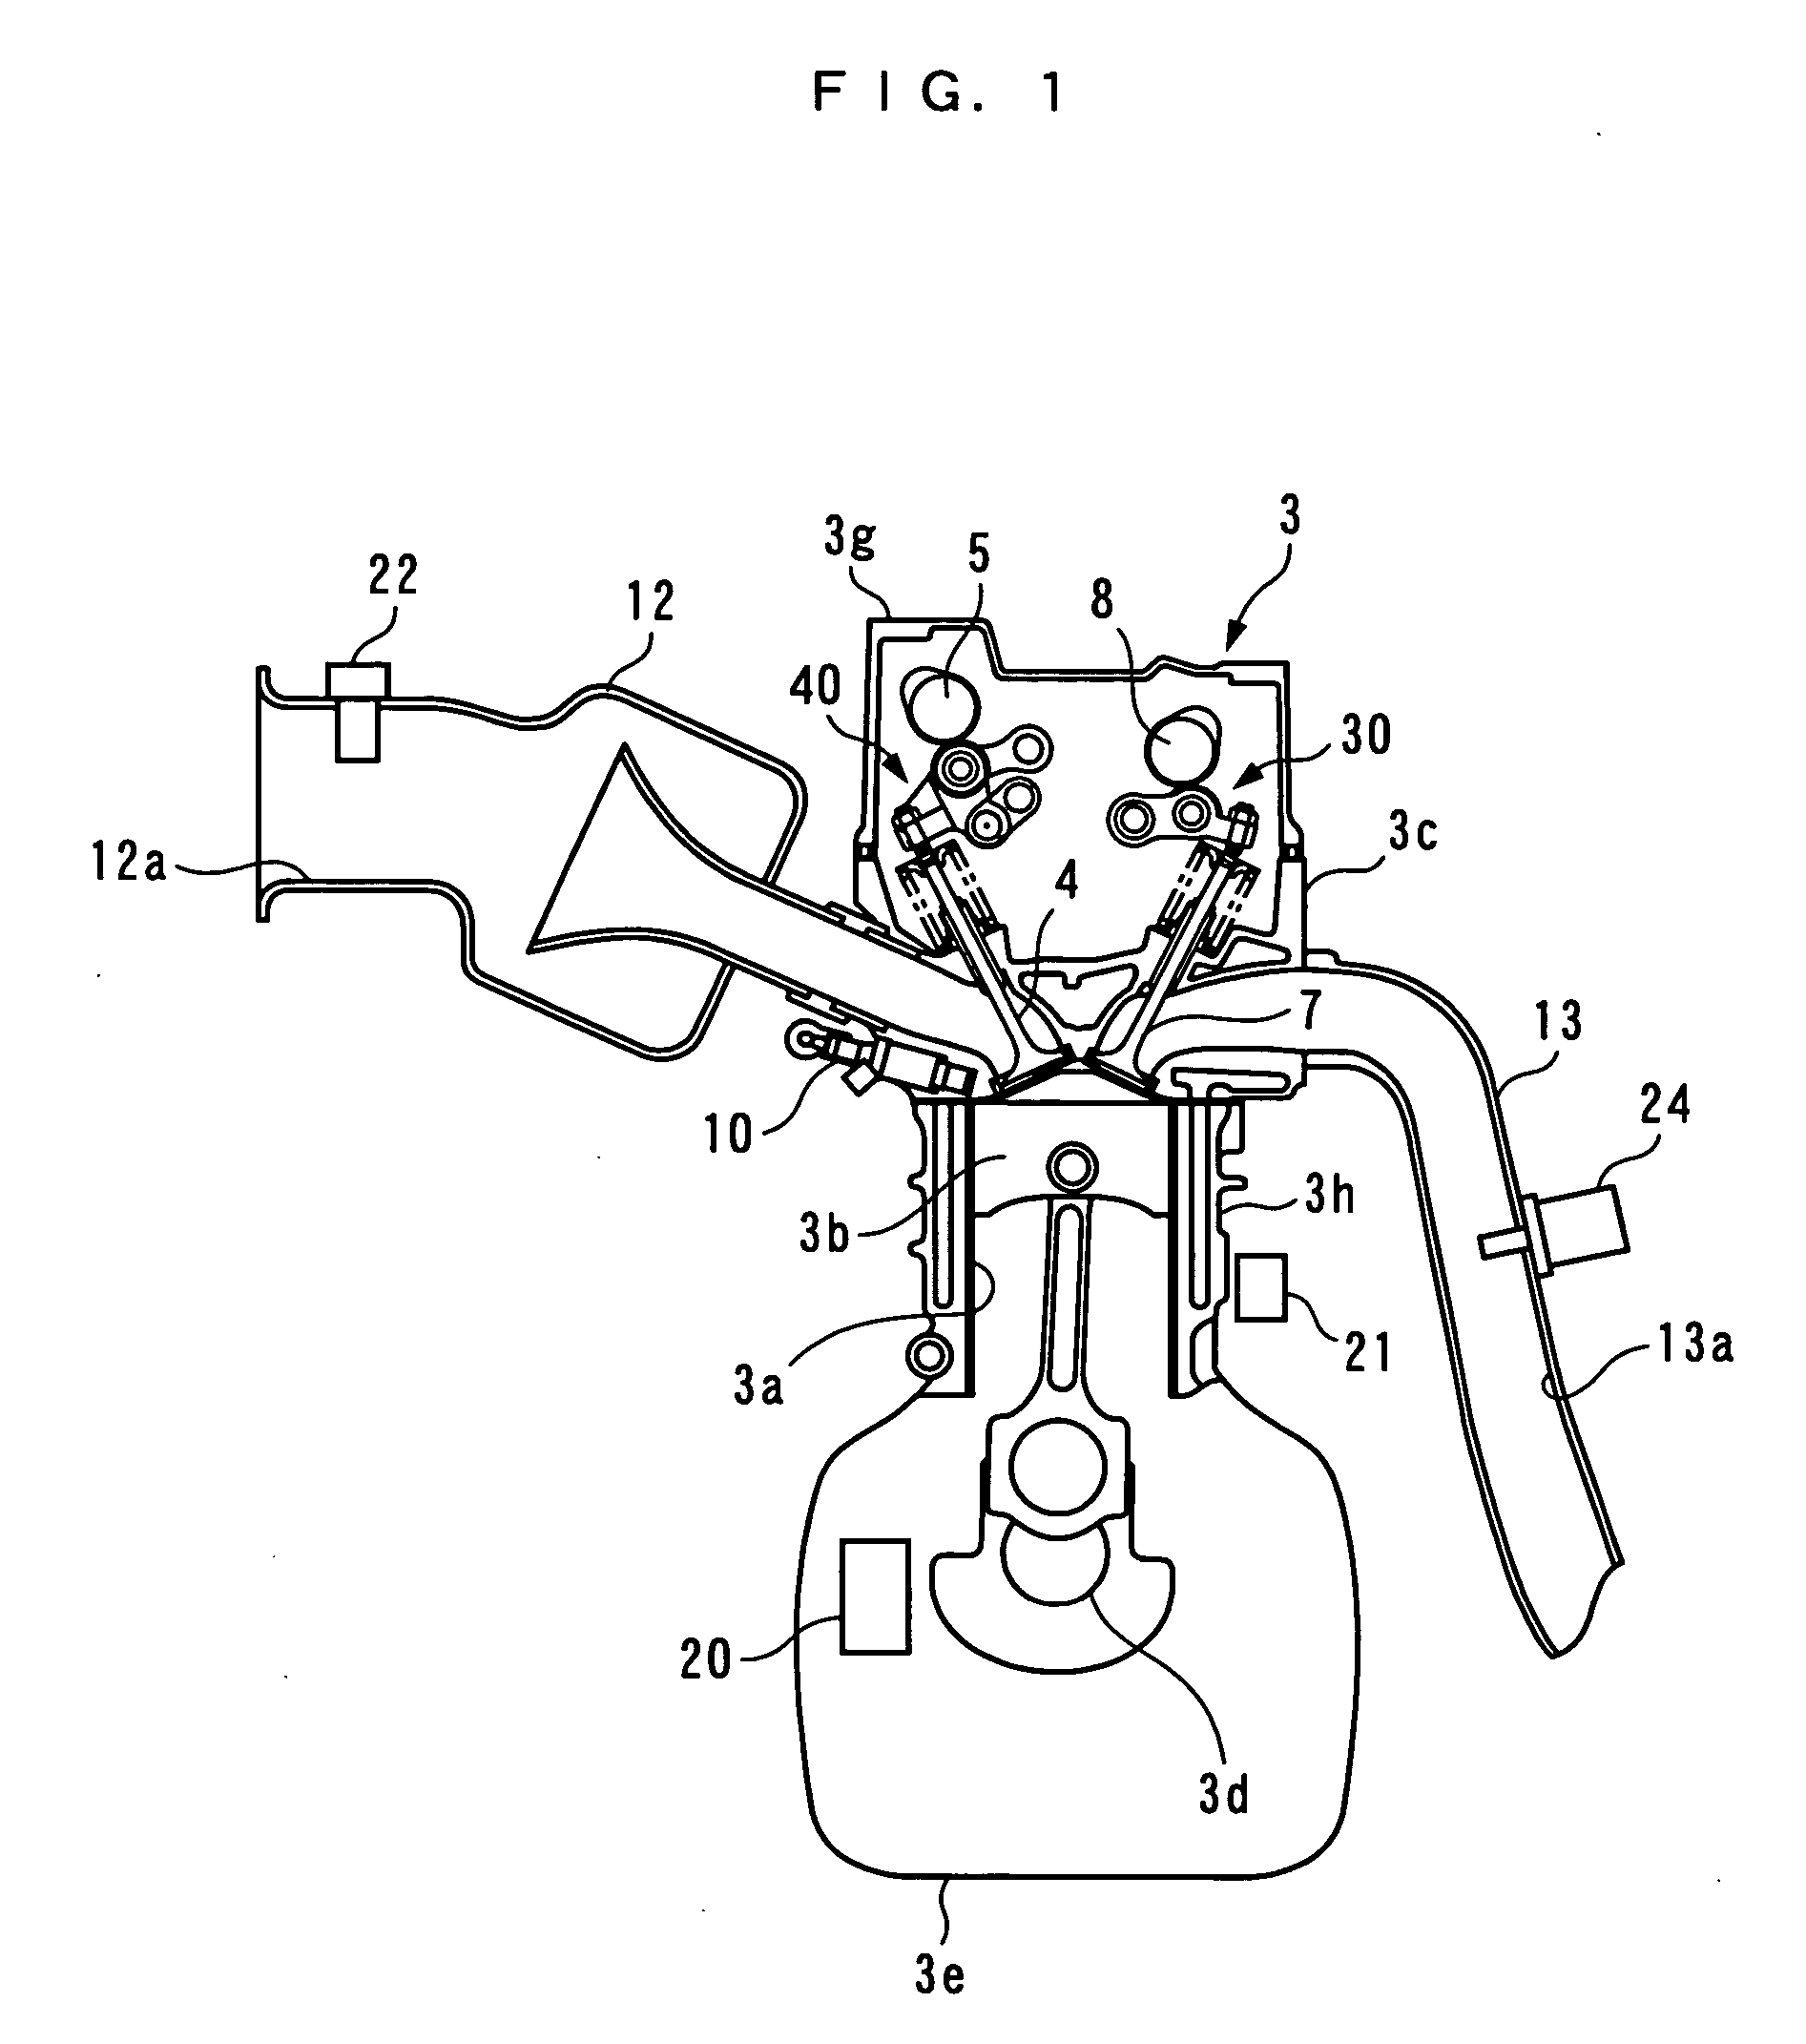 Control System For Internal Combustion Engine